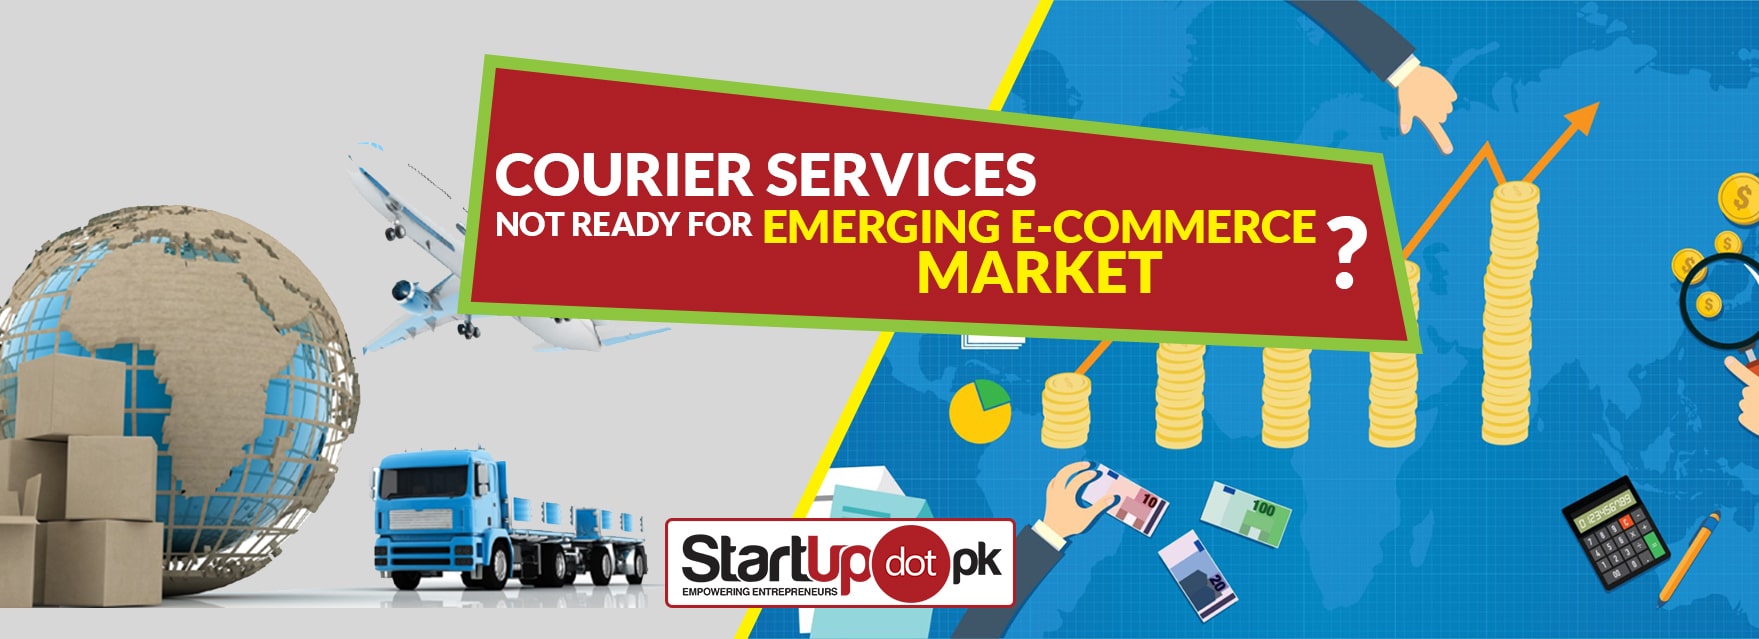 courier-services-emerging-market